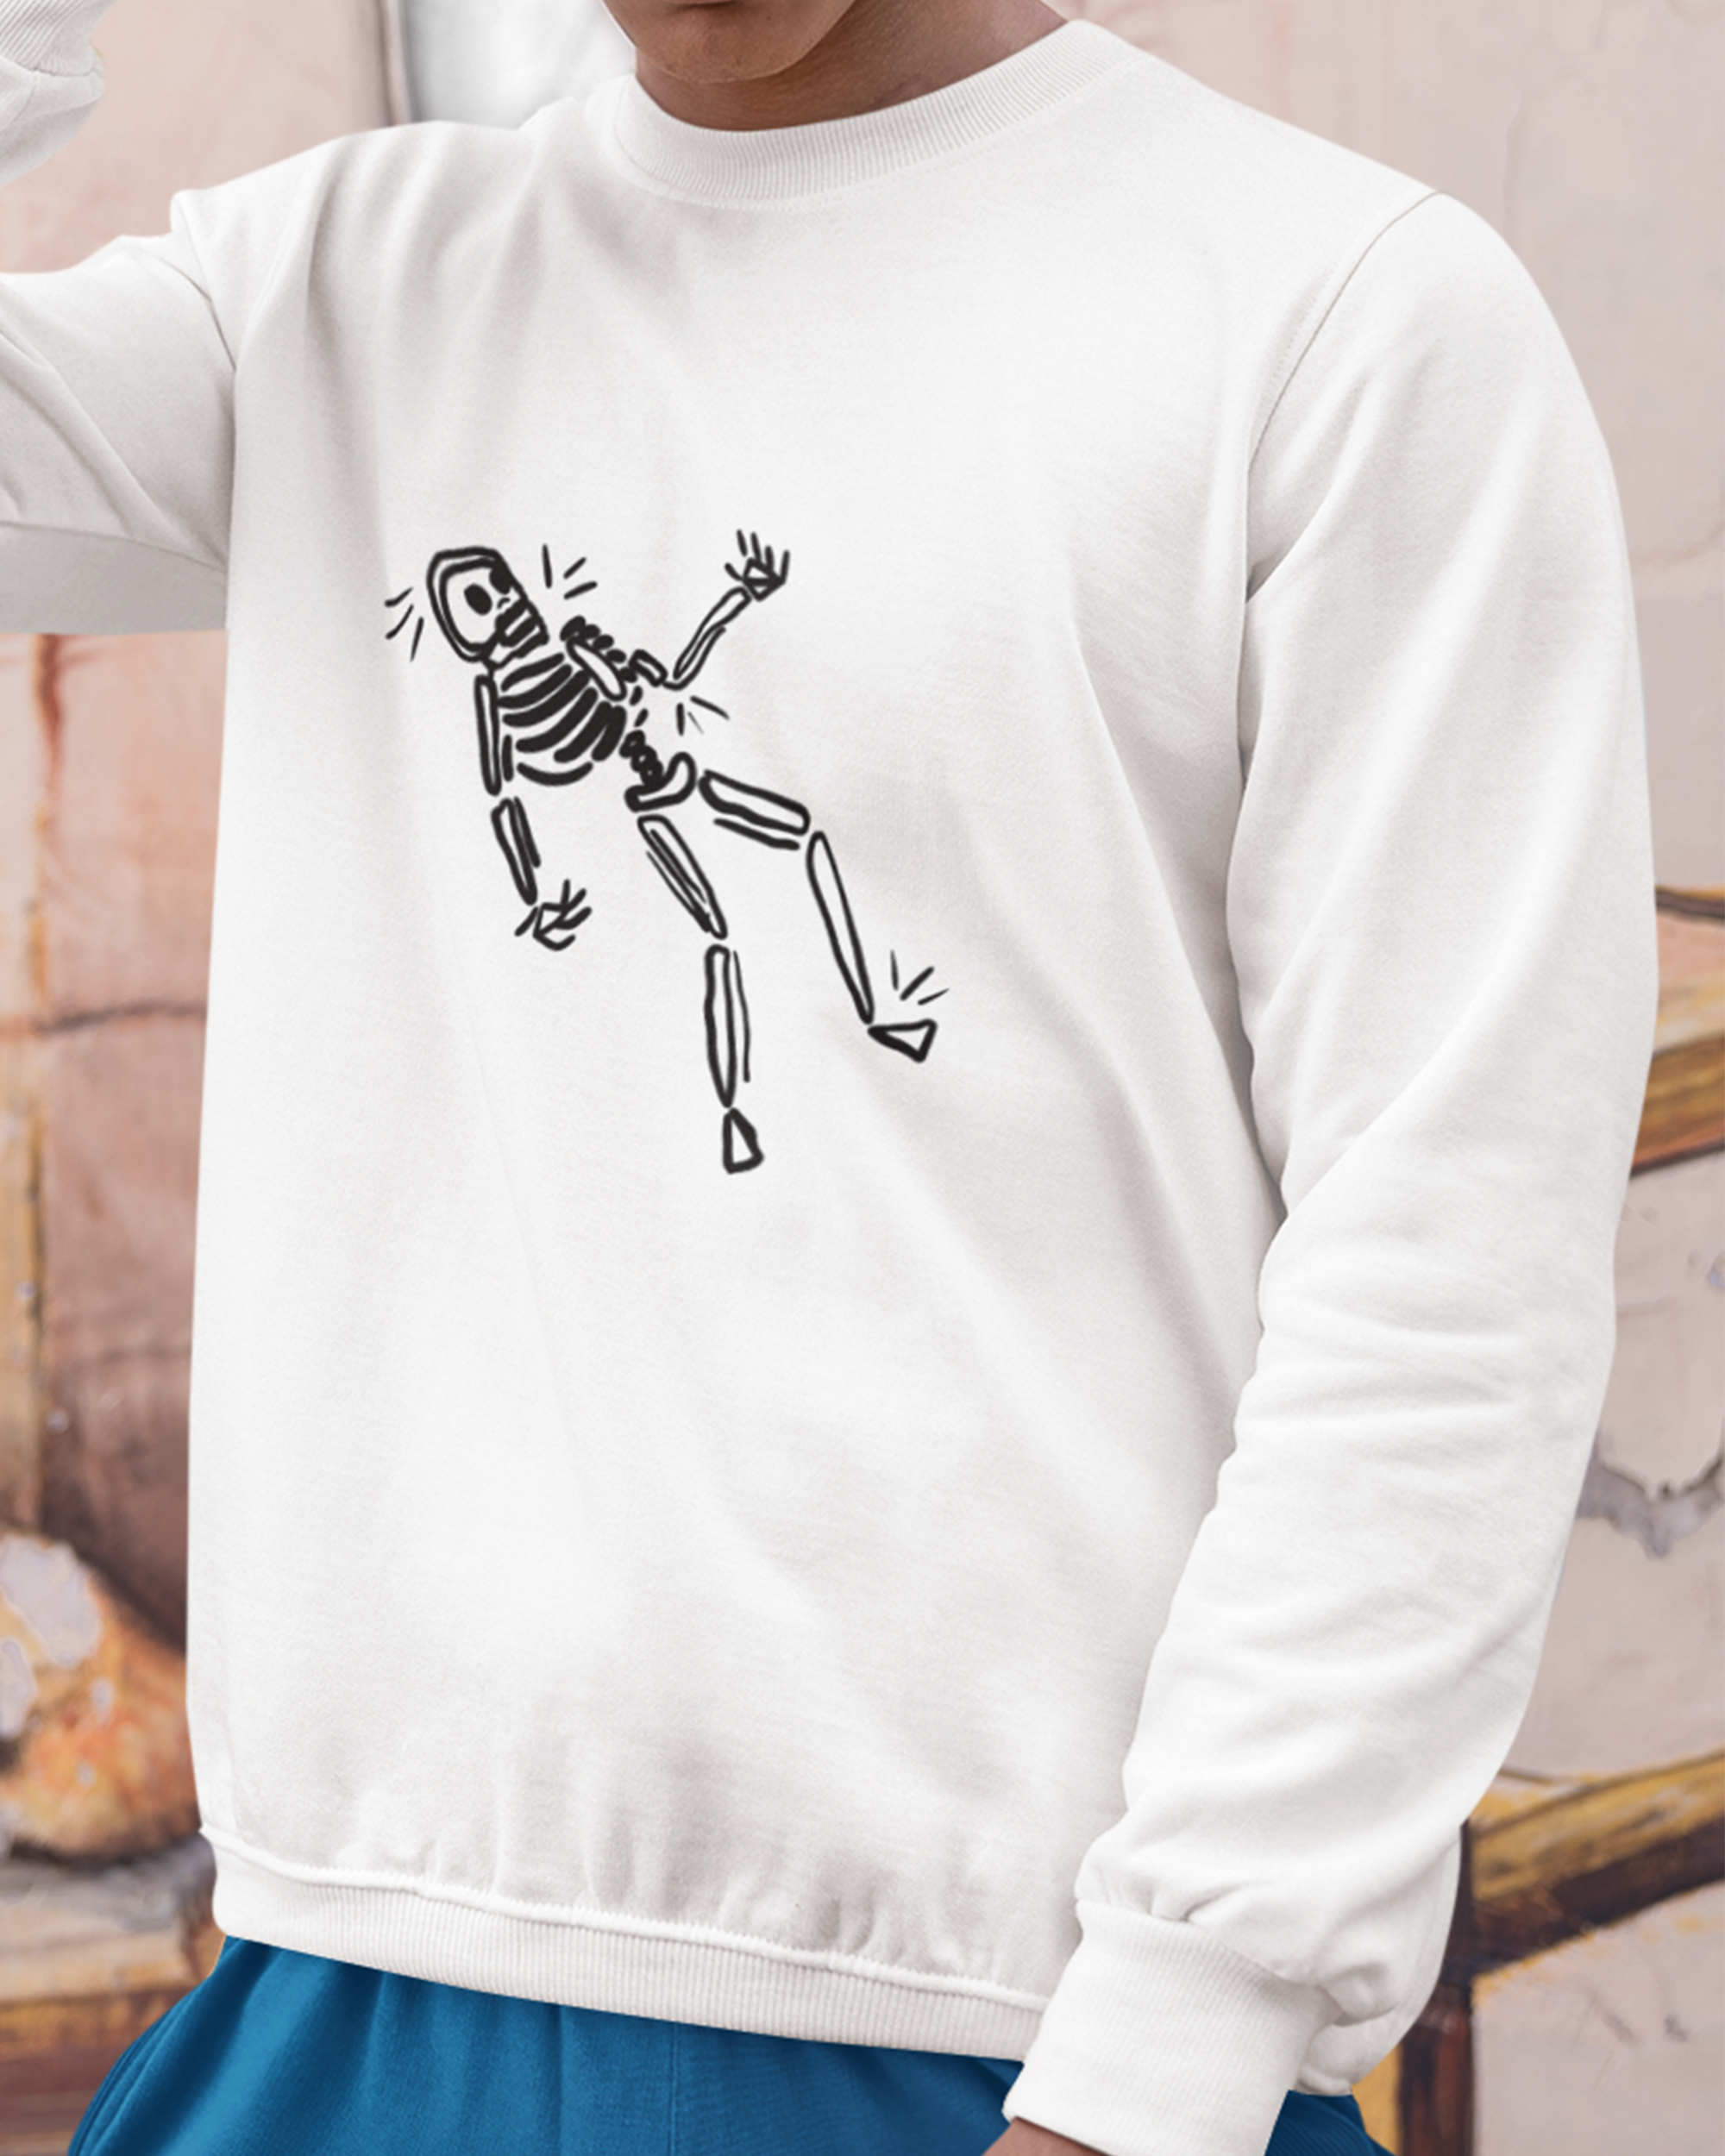 When You Die Nothing Is Going With You Sweatshirt